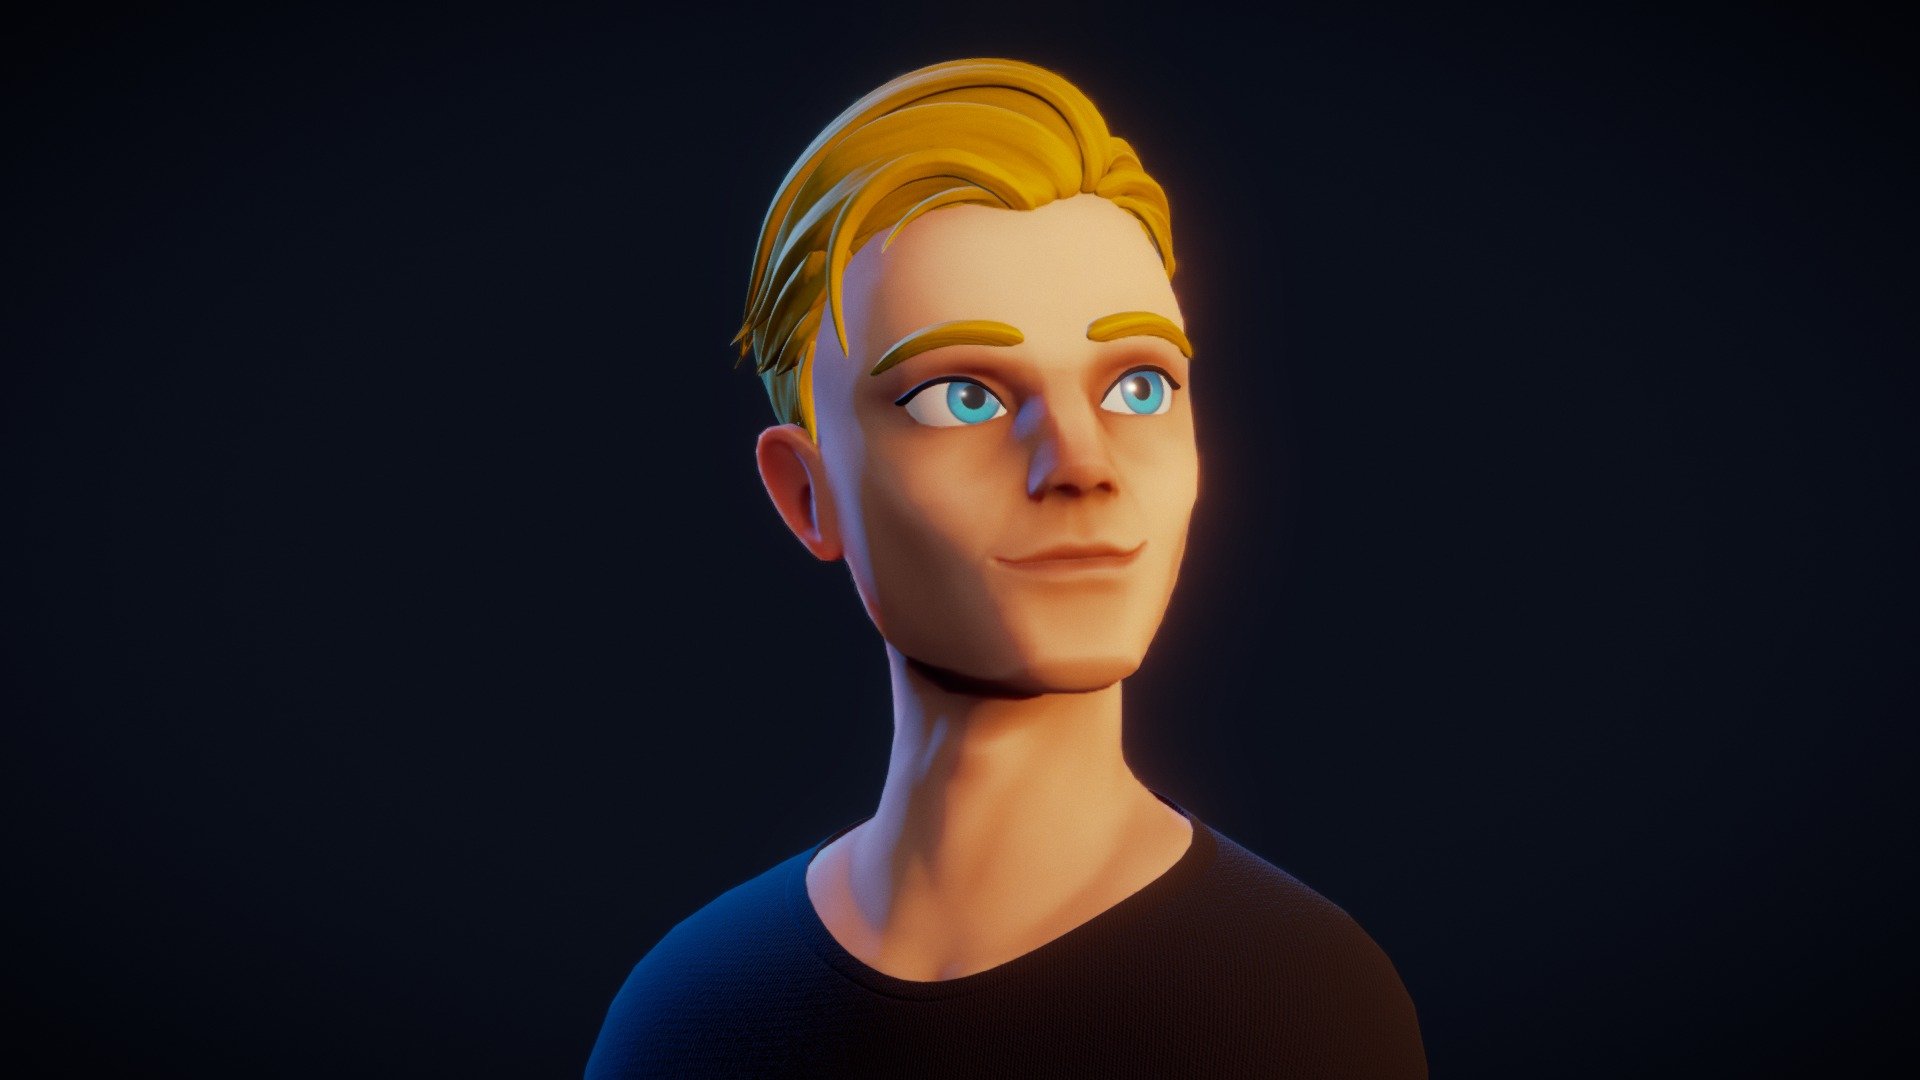 Stylized teenage boy portrait

This model got inspired by fortnite, zelda and overwatch characters, it's a low poly baked model, so it would be rigged and animated 3d model